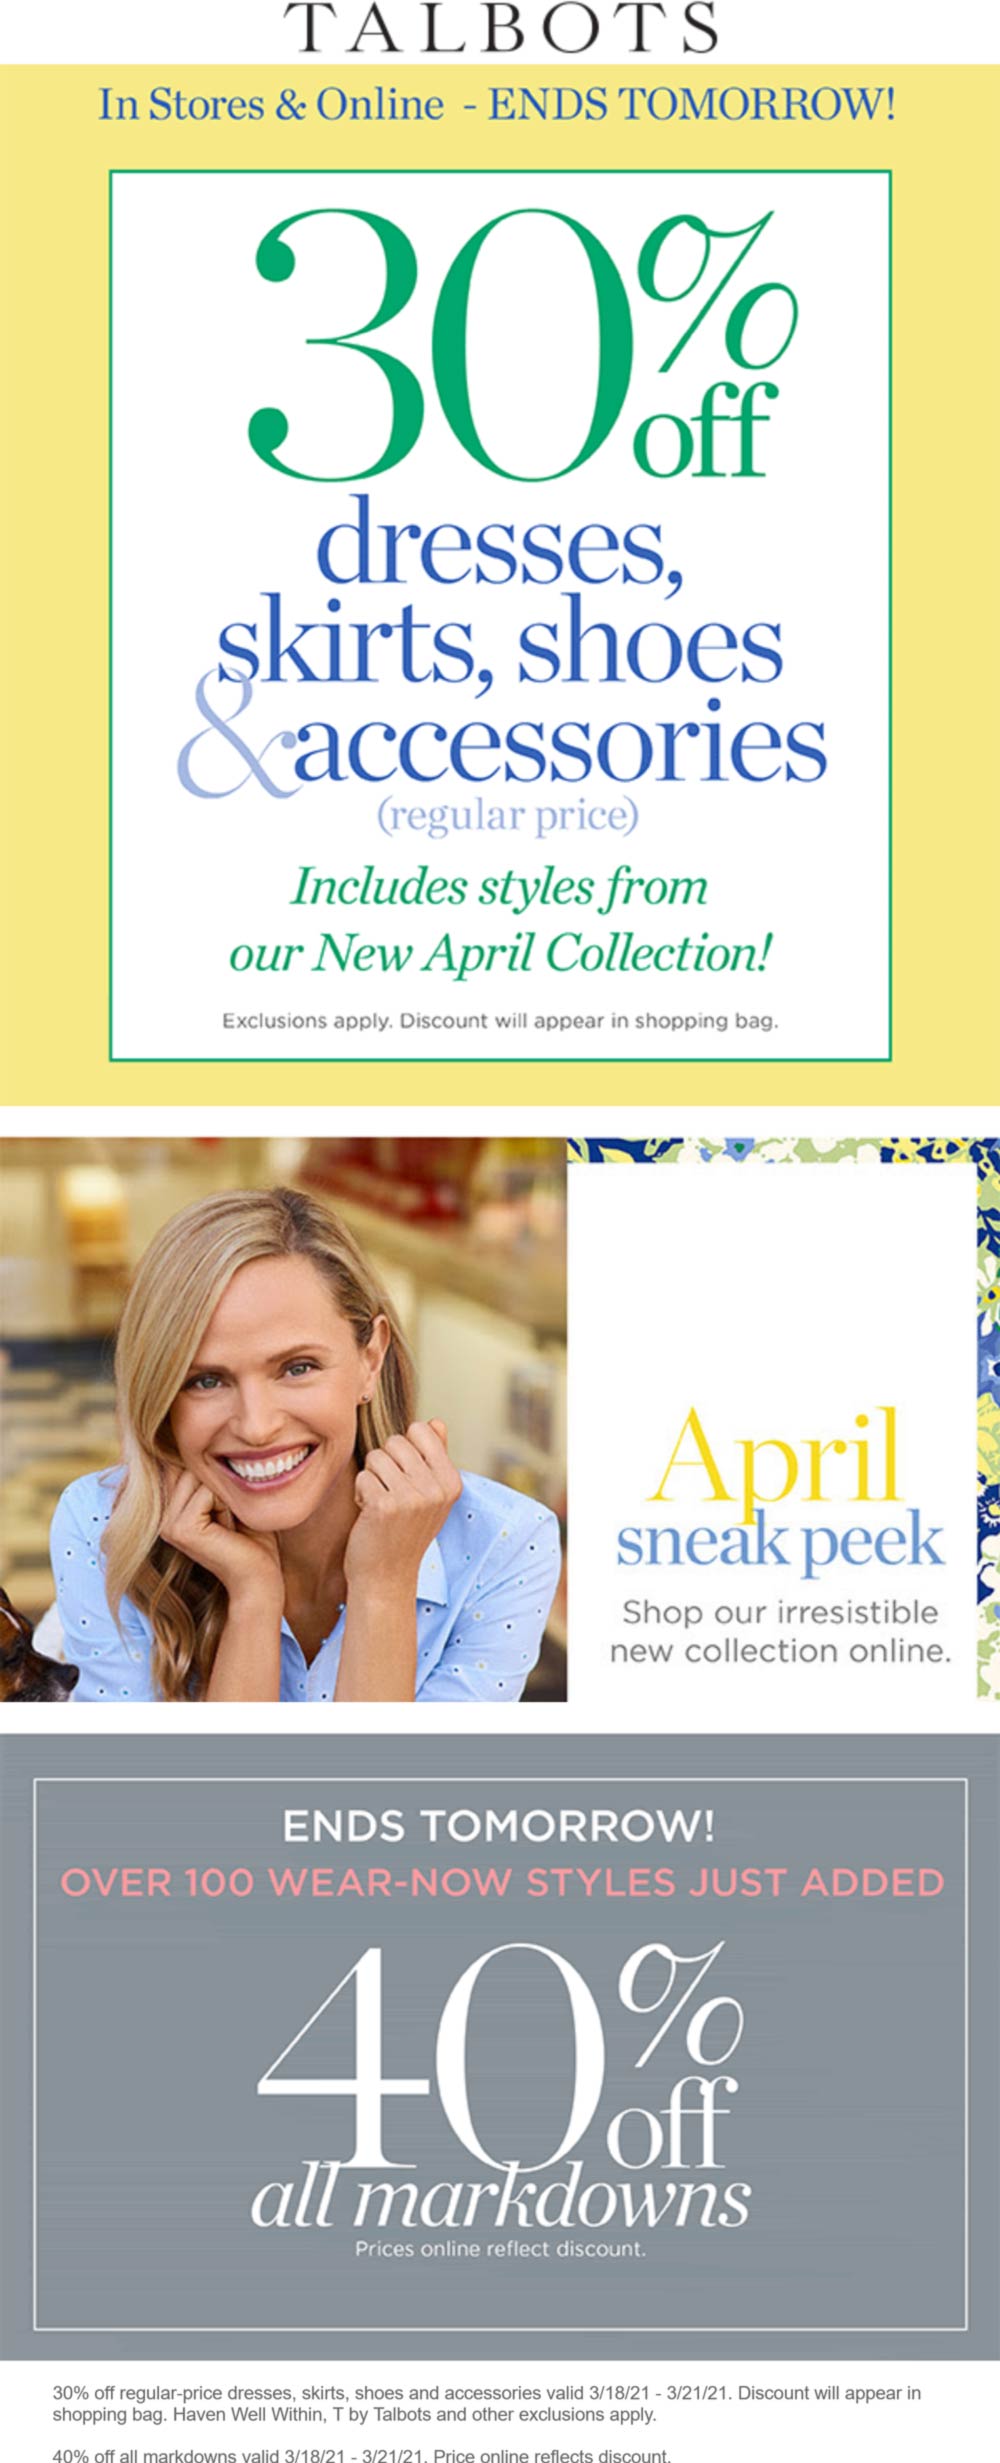 Talbots stores Coupon  30% off & more at Talbots, ditto online #talbots 